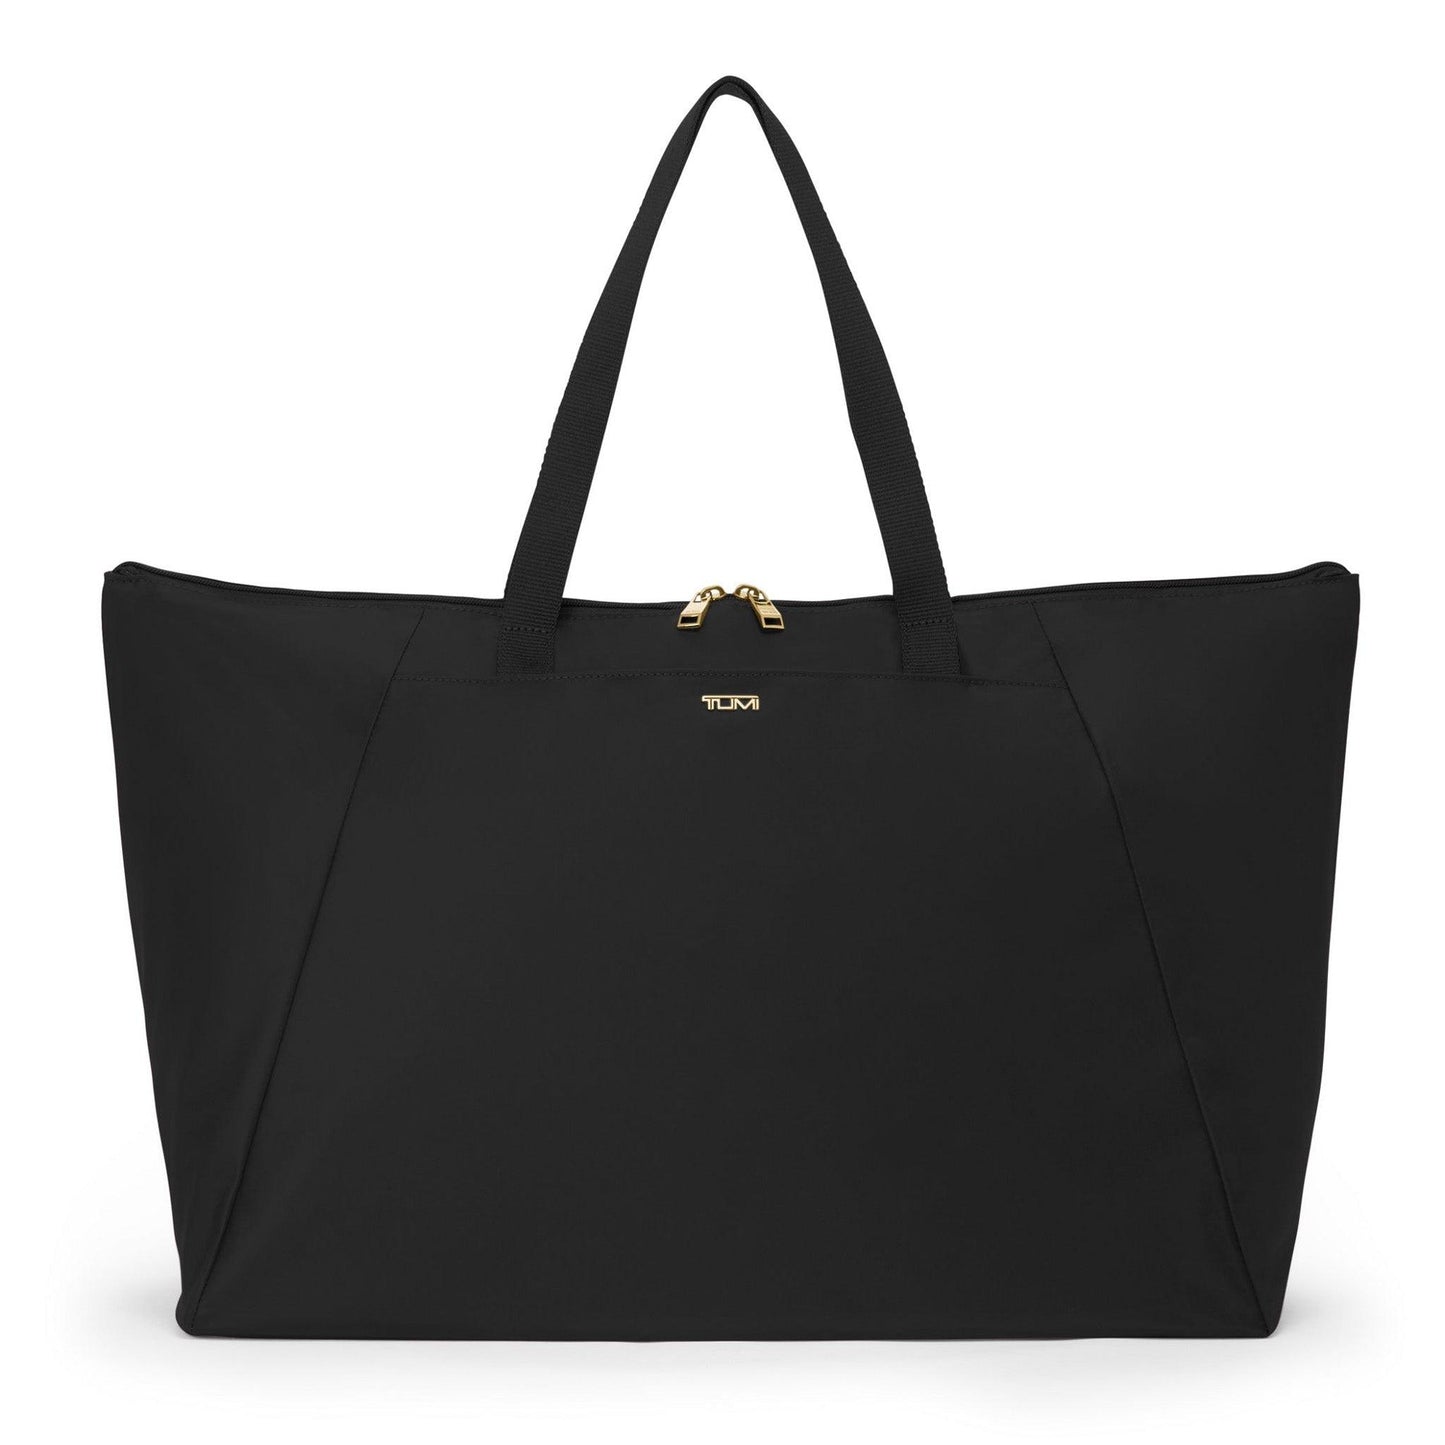 Just In Case® Tote - Black/Gold - Cosmos Boutique New Jersey